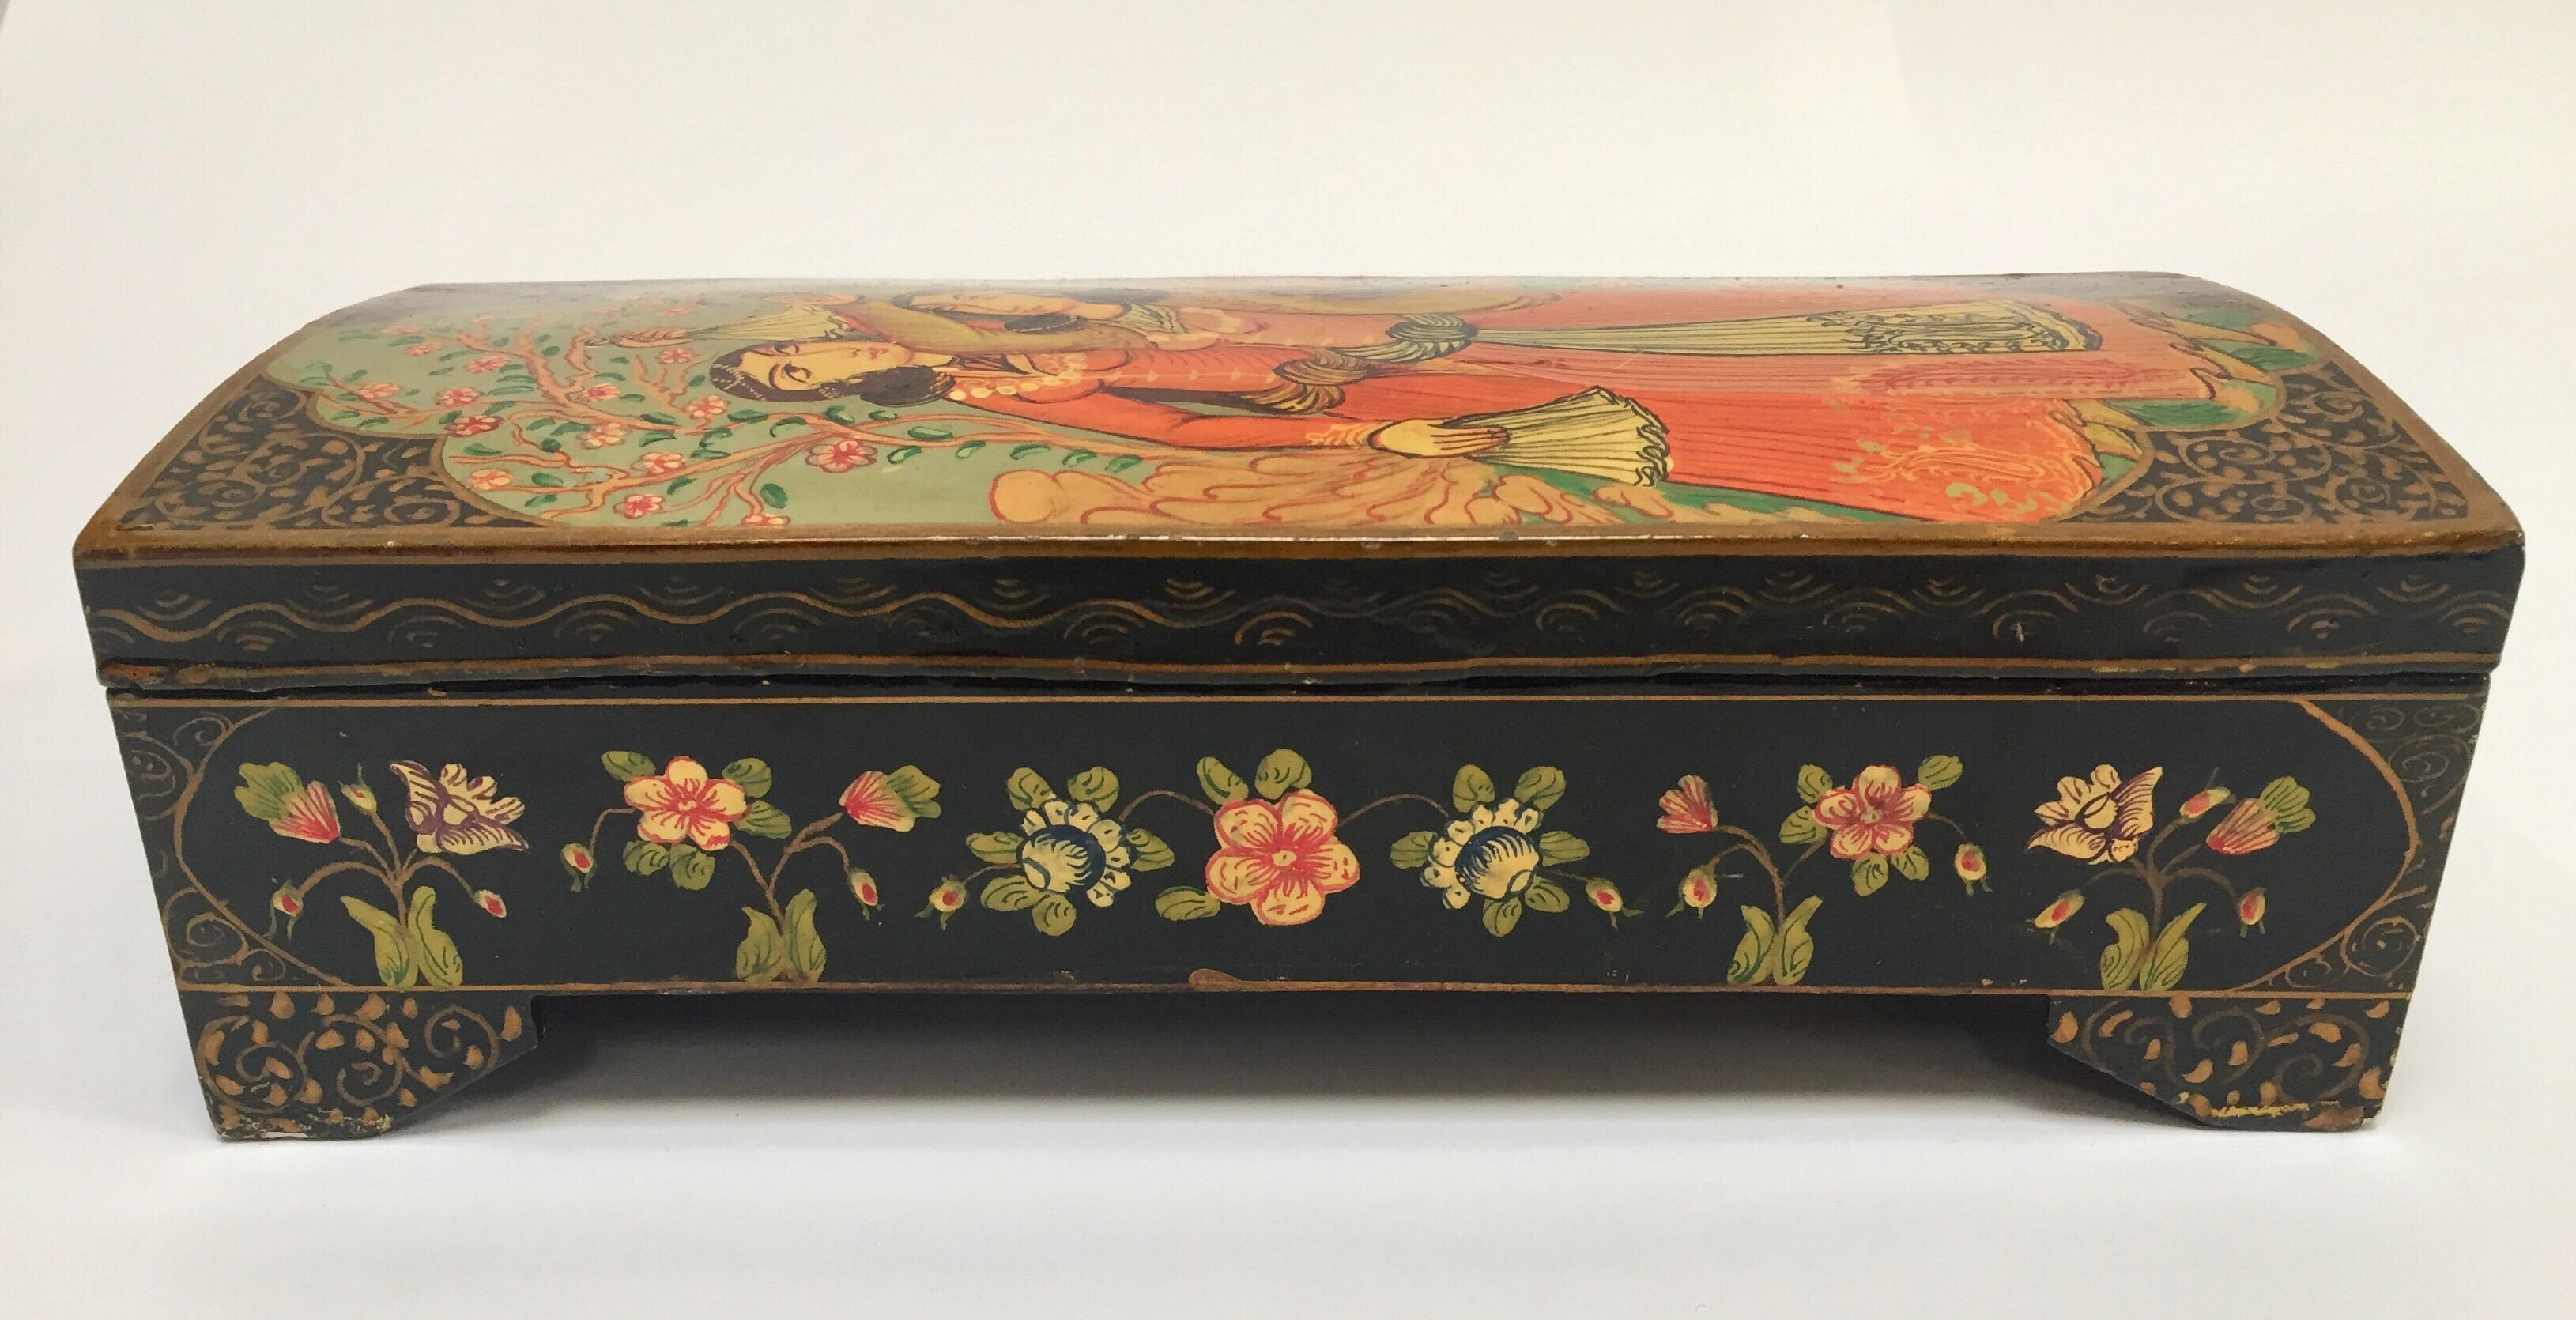 20th Century Lacquer Pen Box Hand Painted with Harem Girls Playing and Dancing